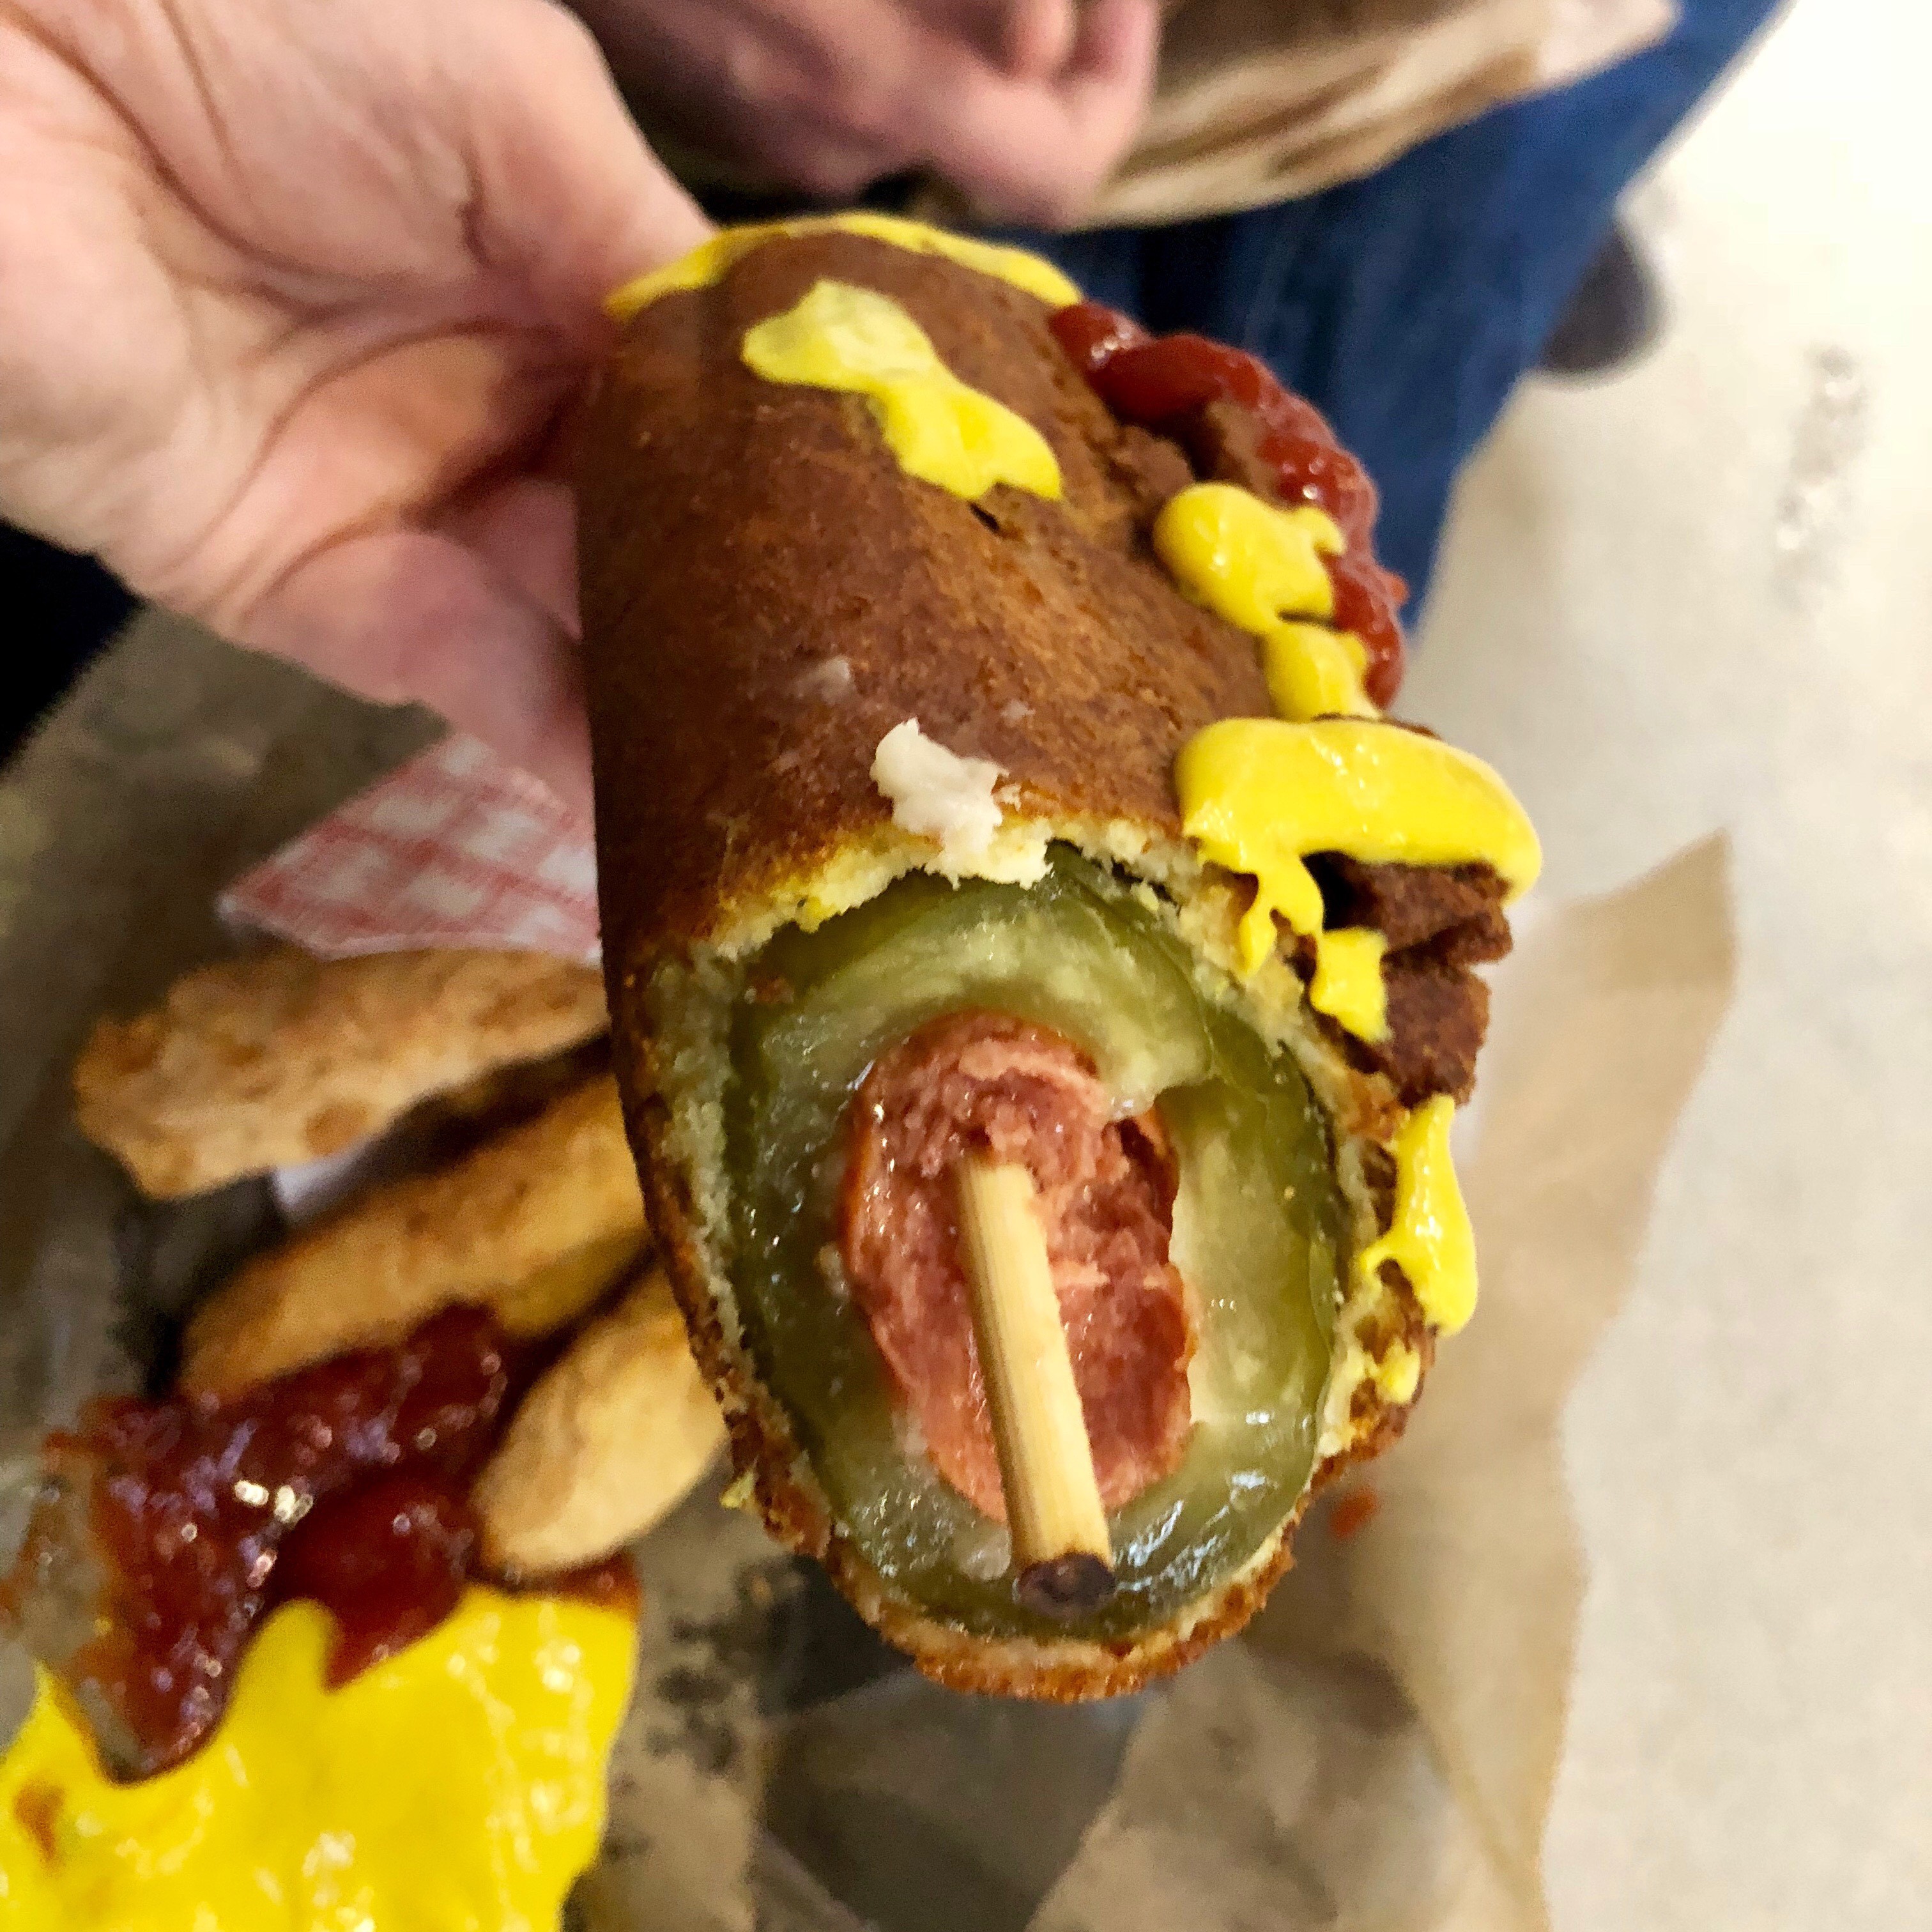 Dilly Dogs and Ham Fries: New Rangers Ballpark Food at Globe Life